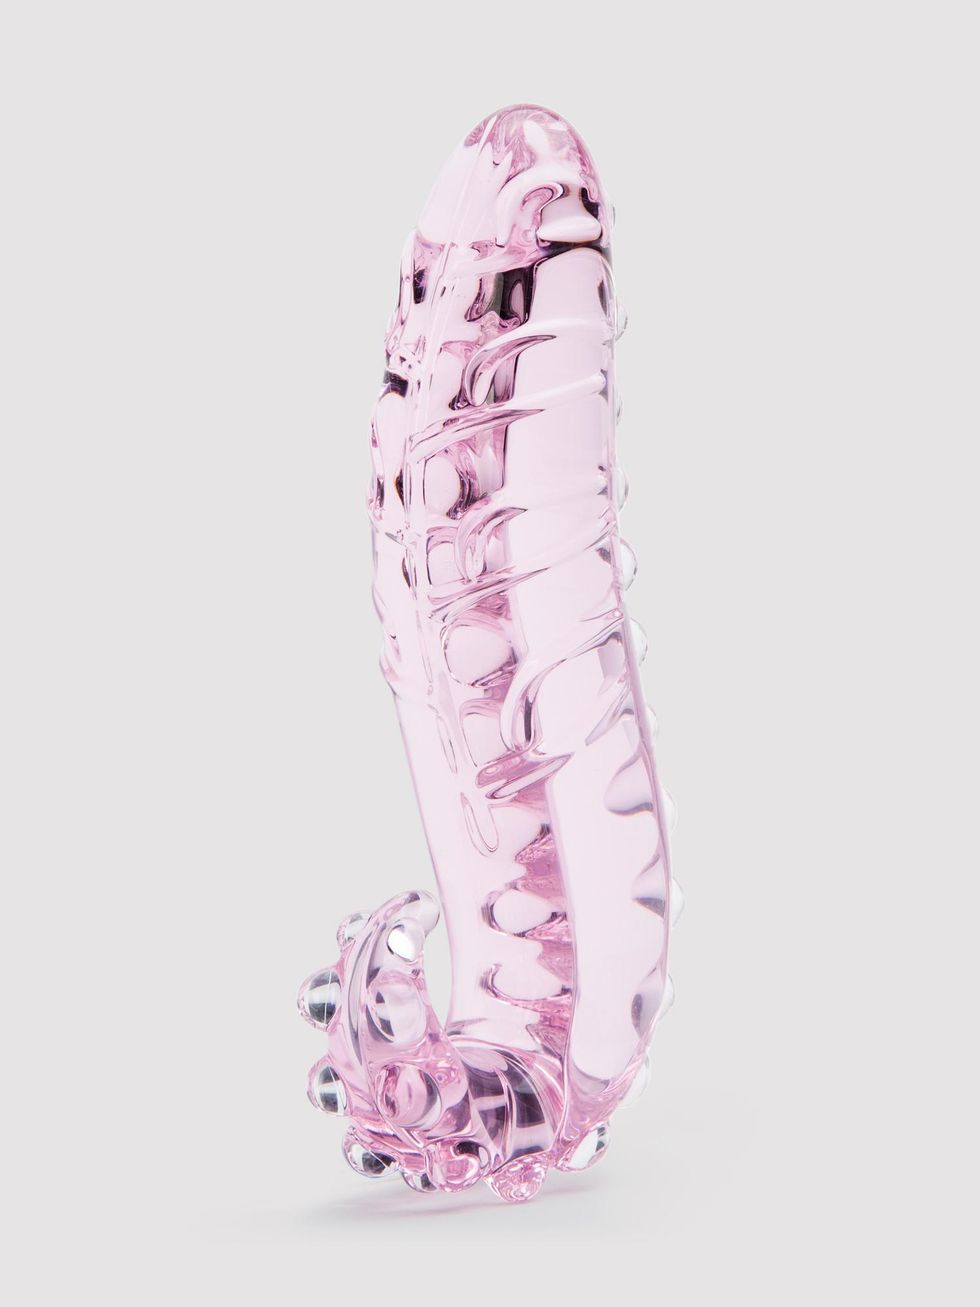 Unknown Sex Toys - 26 Weird Sex Toys for Getting Freaky in the Bedroom